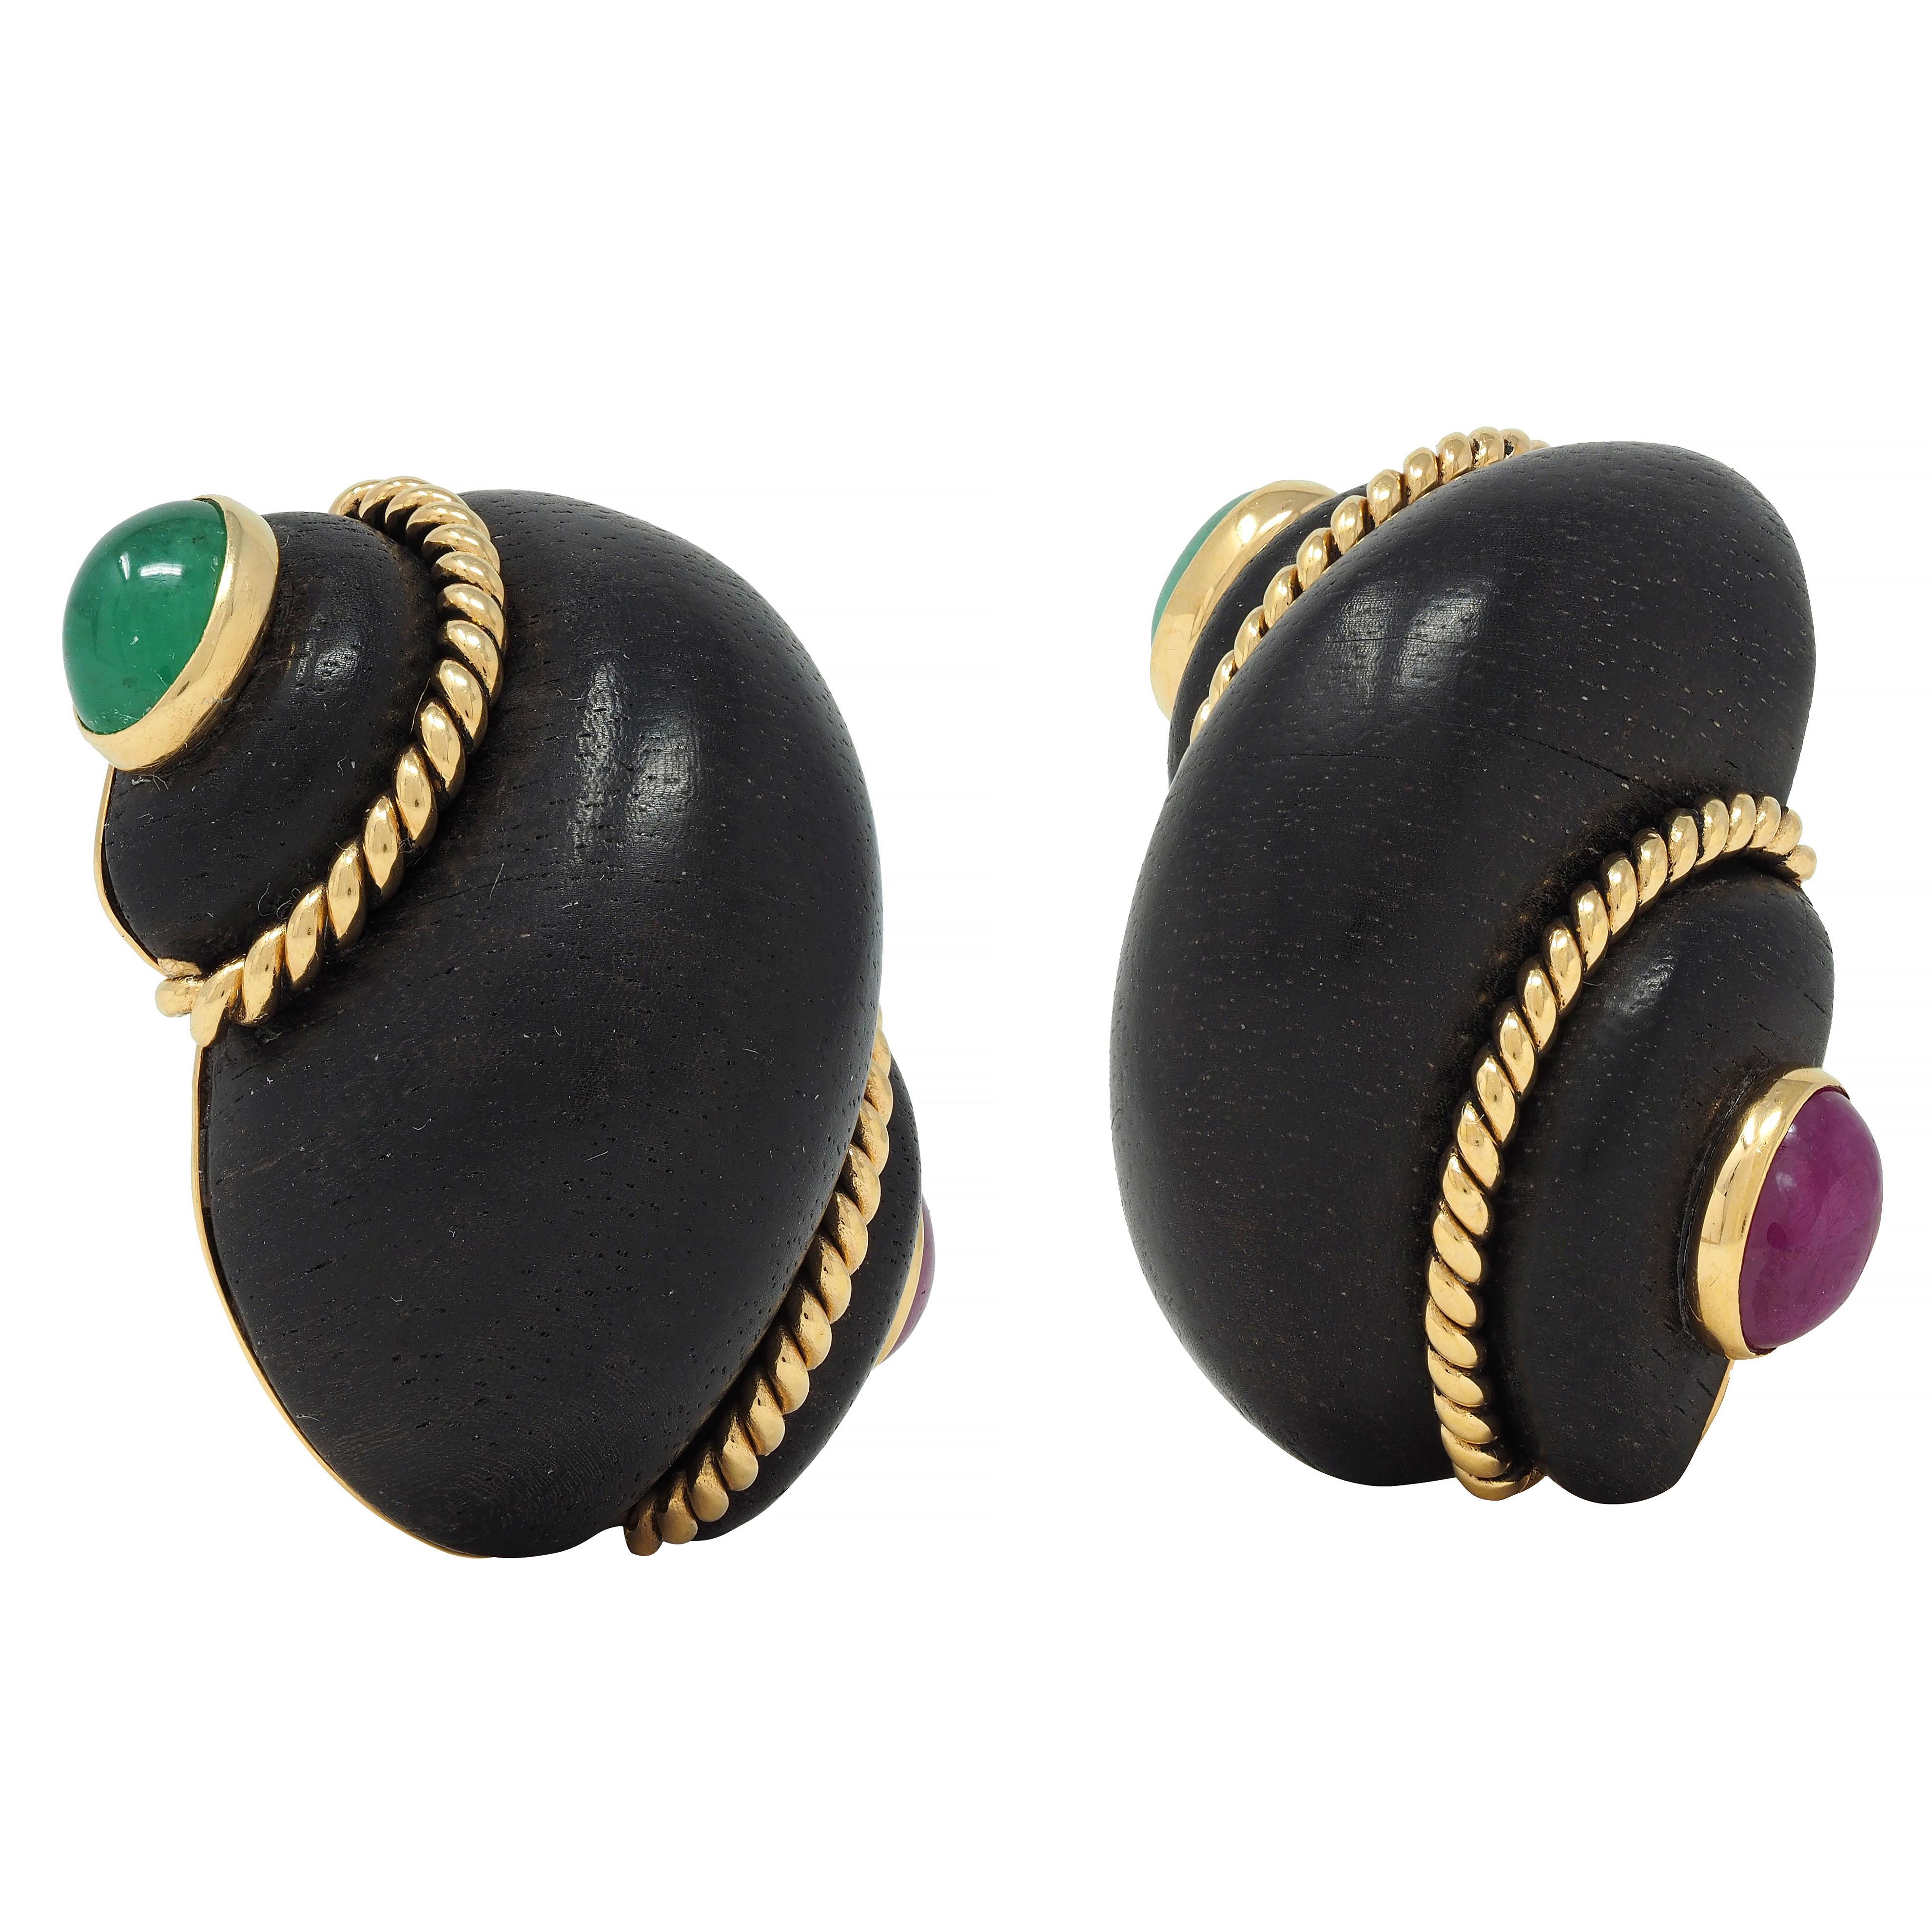 Designed as carved wooden shells with arching segments - dark brown with smooth grain
Wrapped with twisted rope motif yellow gold wire and terminating with gemstones
Comprised of bezel-set oval-shaped ruby and emerald cabochons 
Rubies weigh